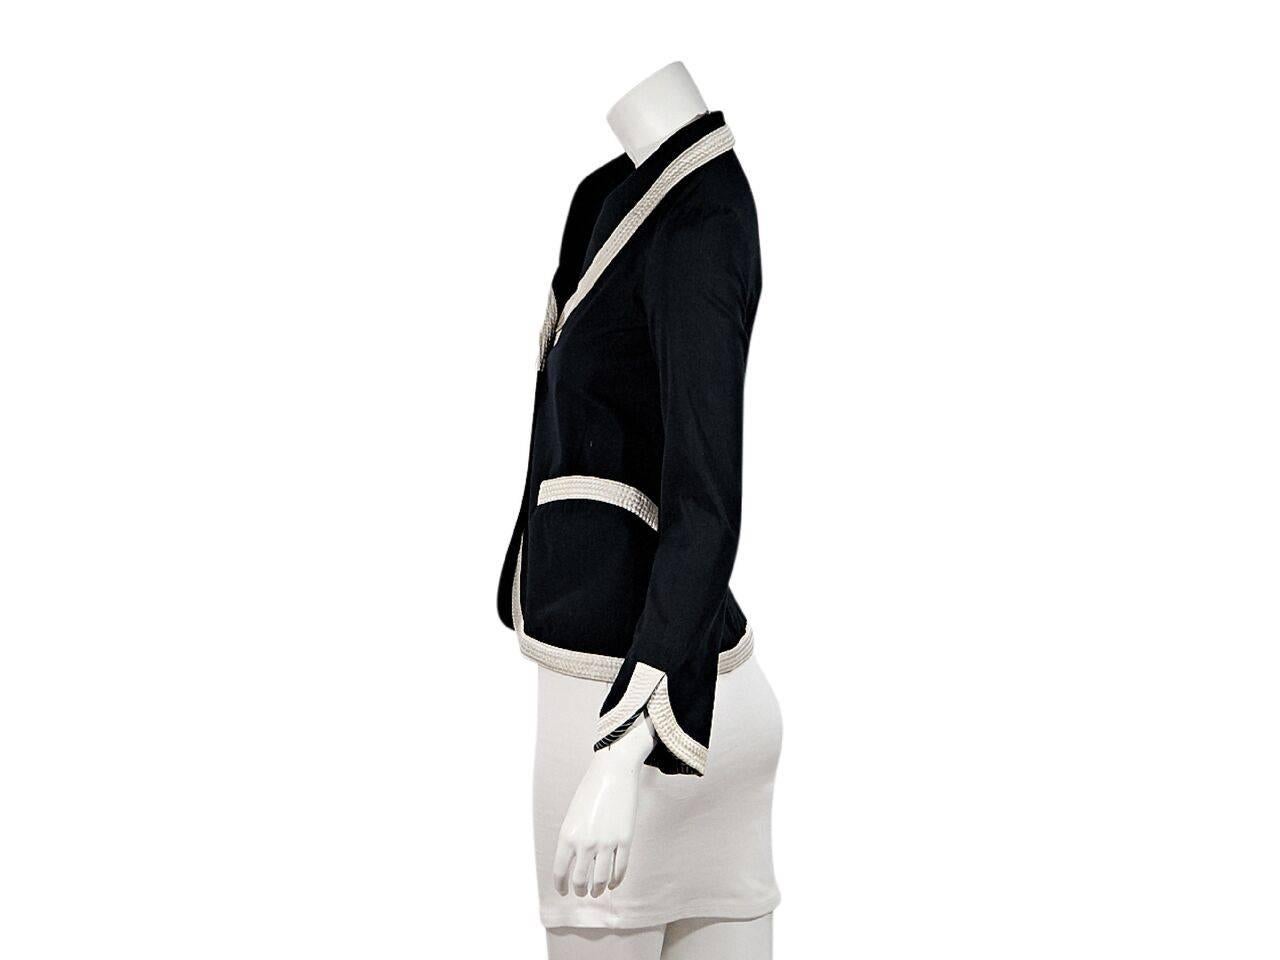 Product details:  Black blazer by Louis Vuitton.  Topstitched white trim.  Long sleeves.  Button-front closure.  Waist patch pockets.  
Condition: Pre-owned. Very good.
Est. Retail $ 1,048.00